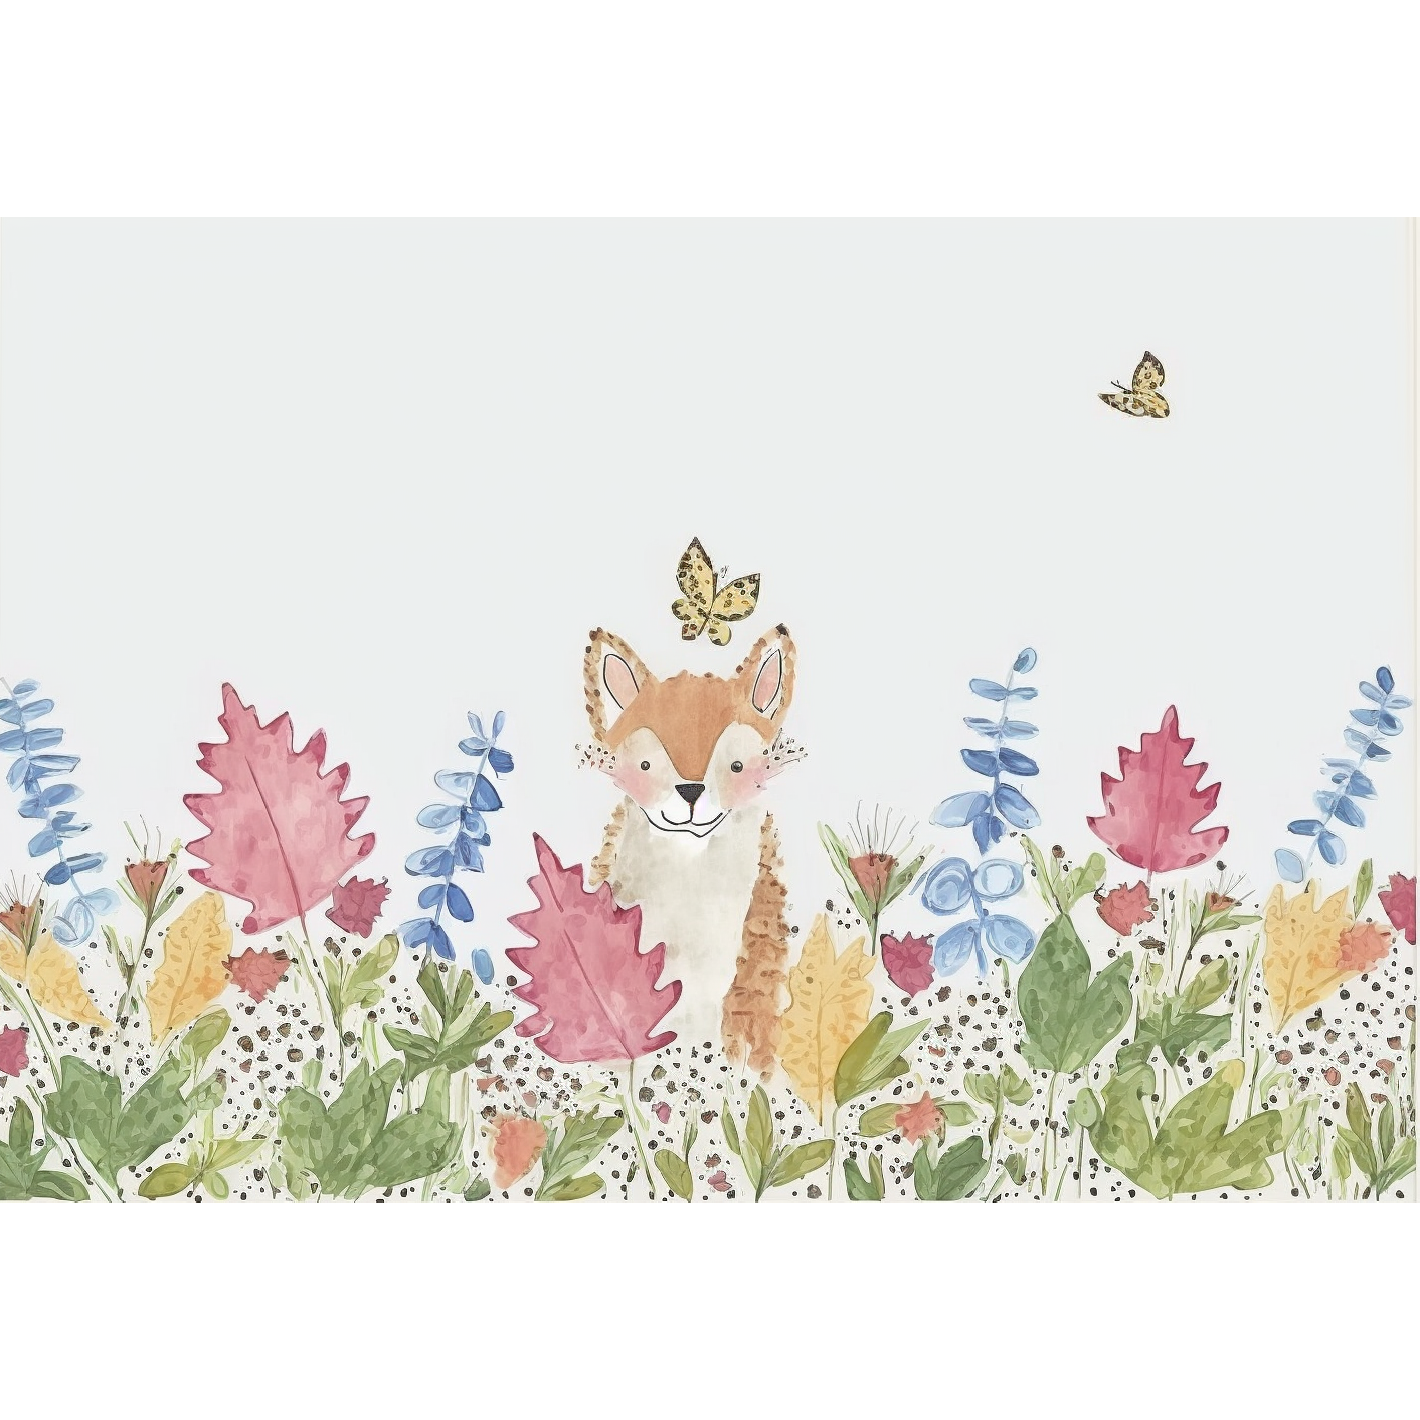 FASart, Whimsical Wonders: Colorful Fox in a Garden - Limited Edition Print